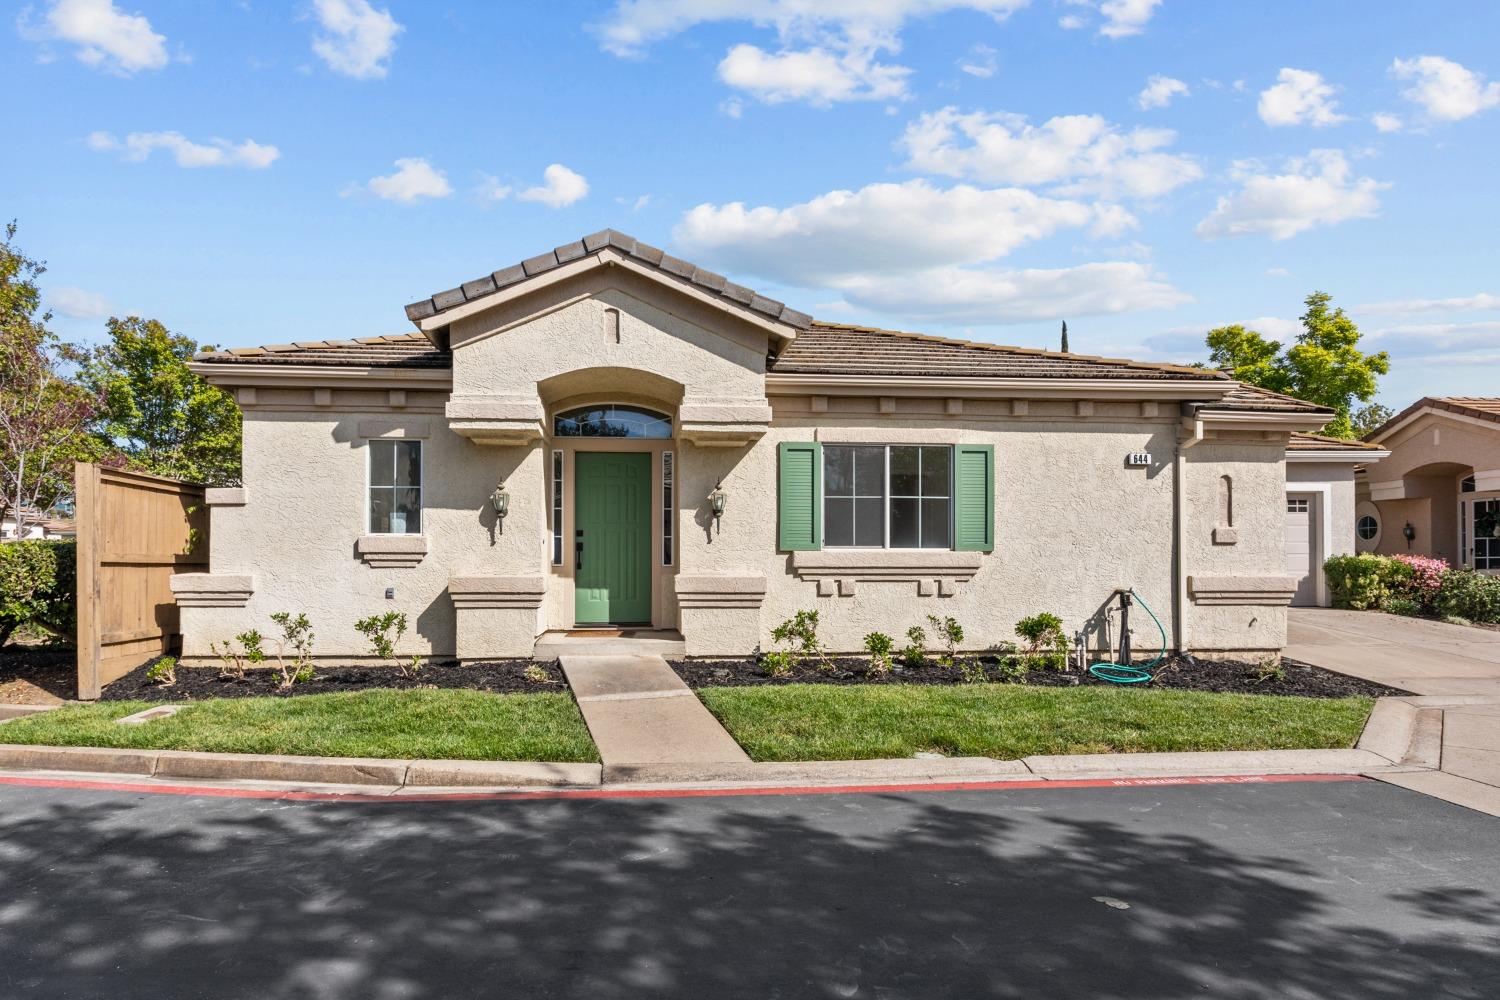 Welcome to 644 Aylsham Ct in Folsom, CA! This charming home offers a blend of comfort and sophistica